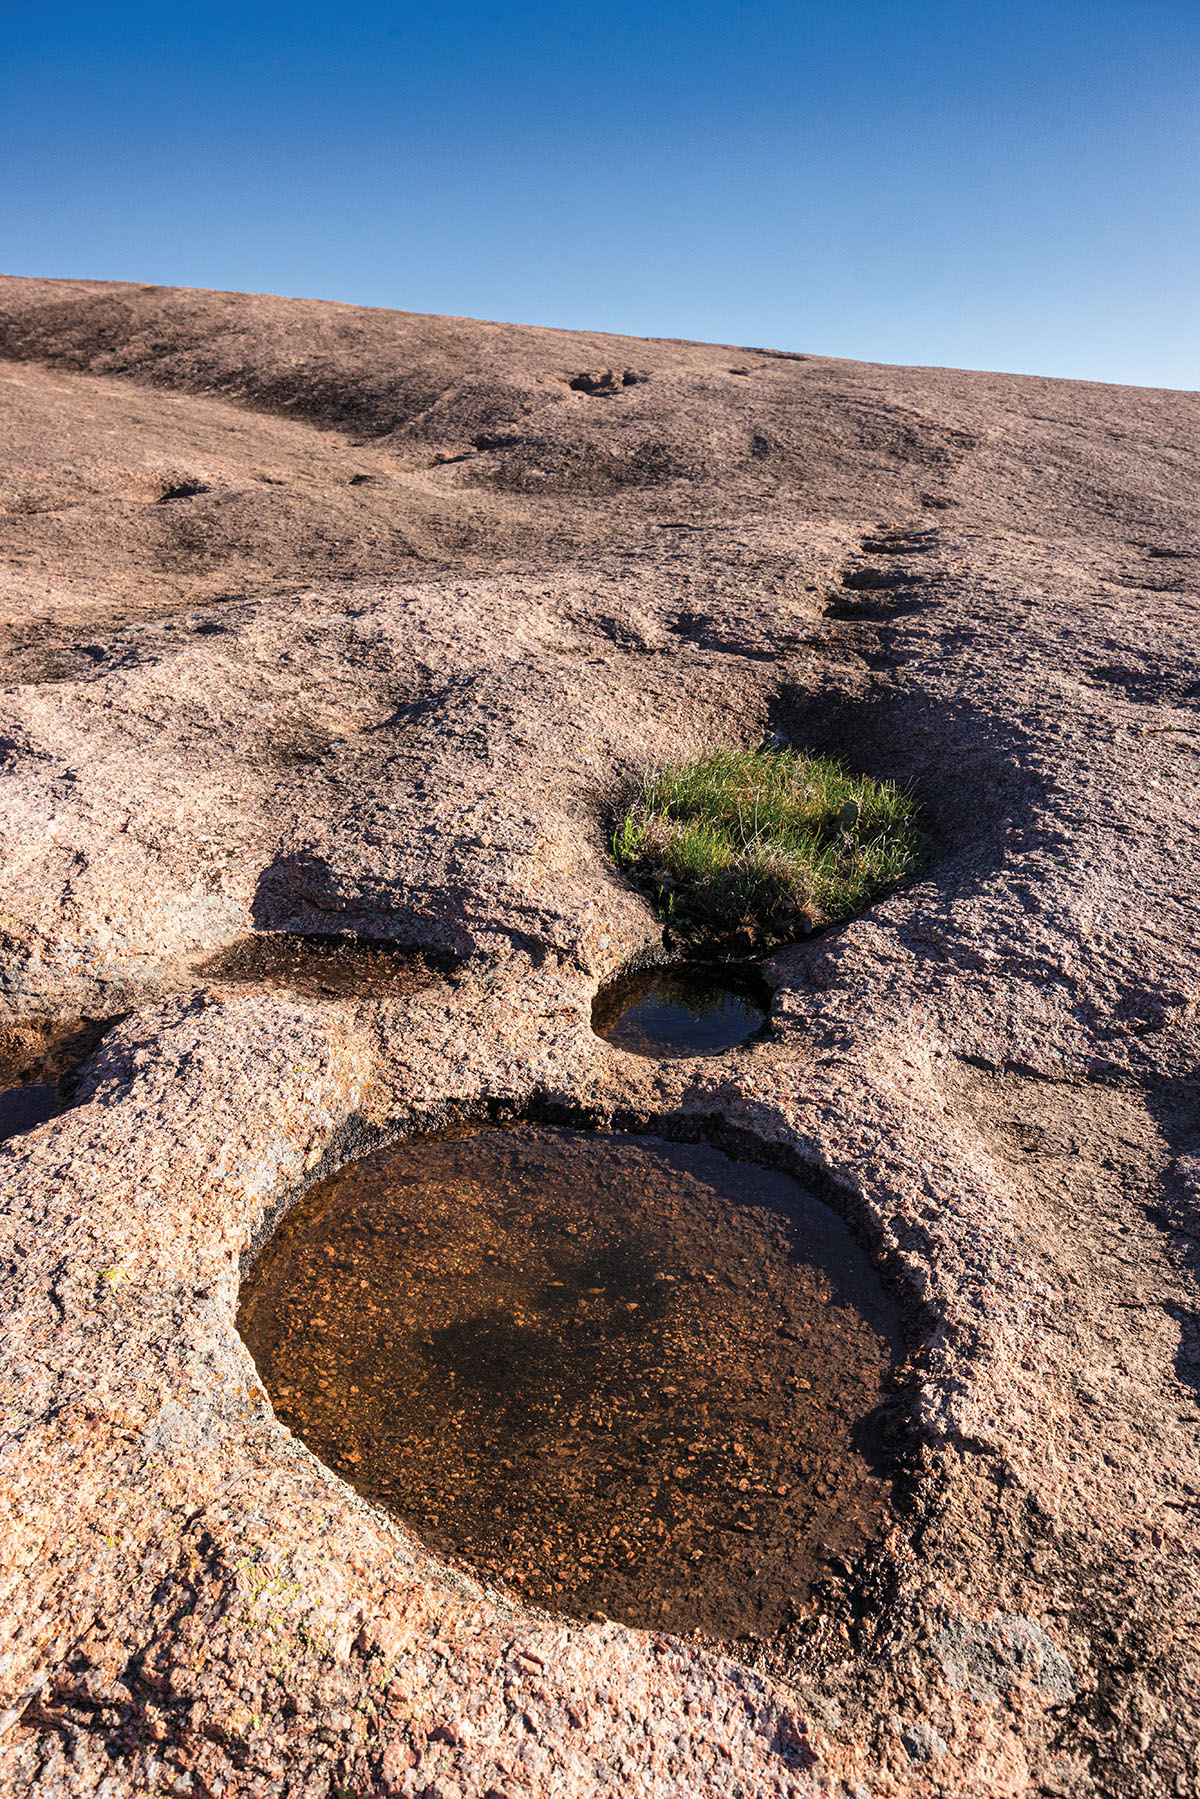 Small pools of brown water cover the dark stone landscape under blue sky at Enchanted Rock